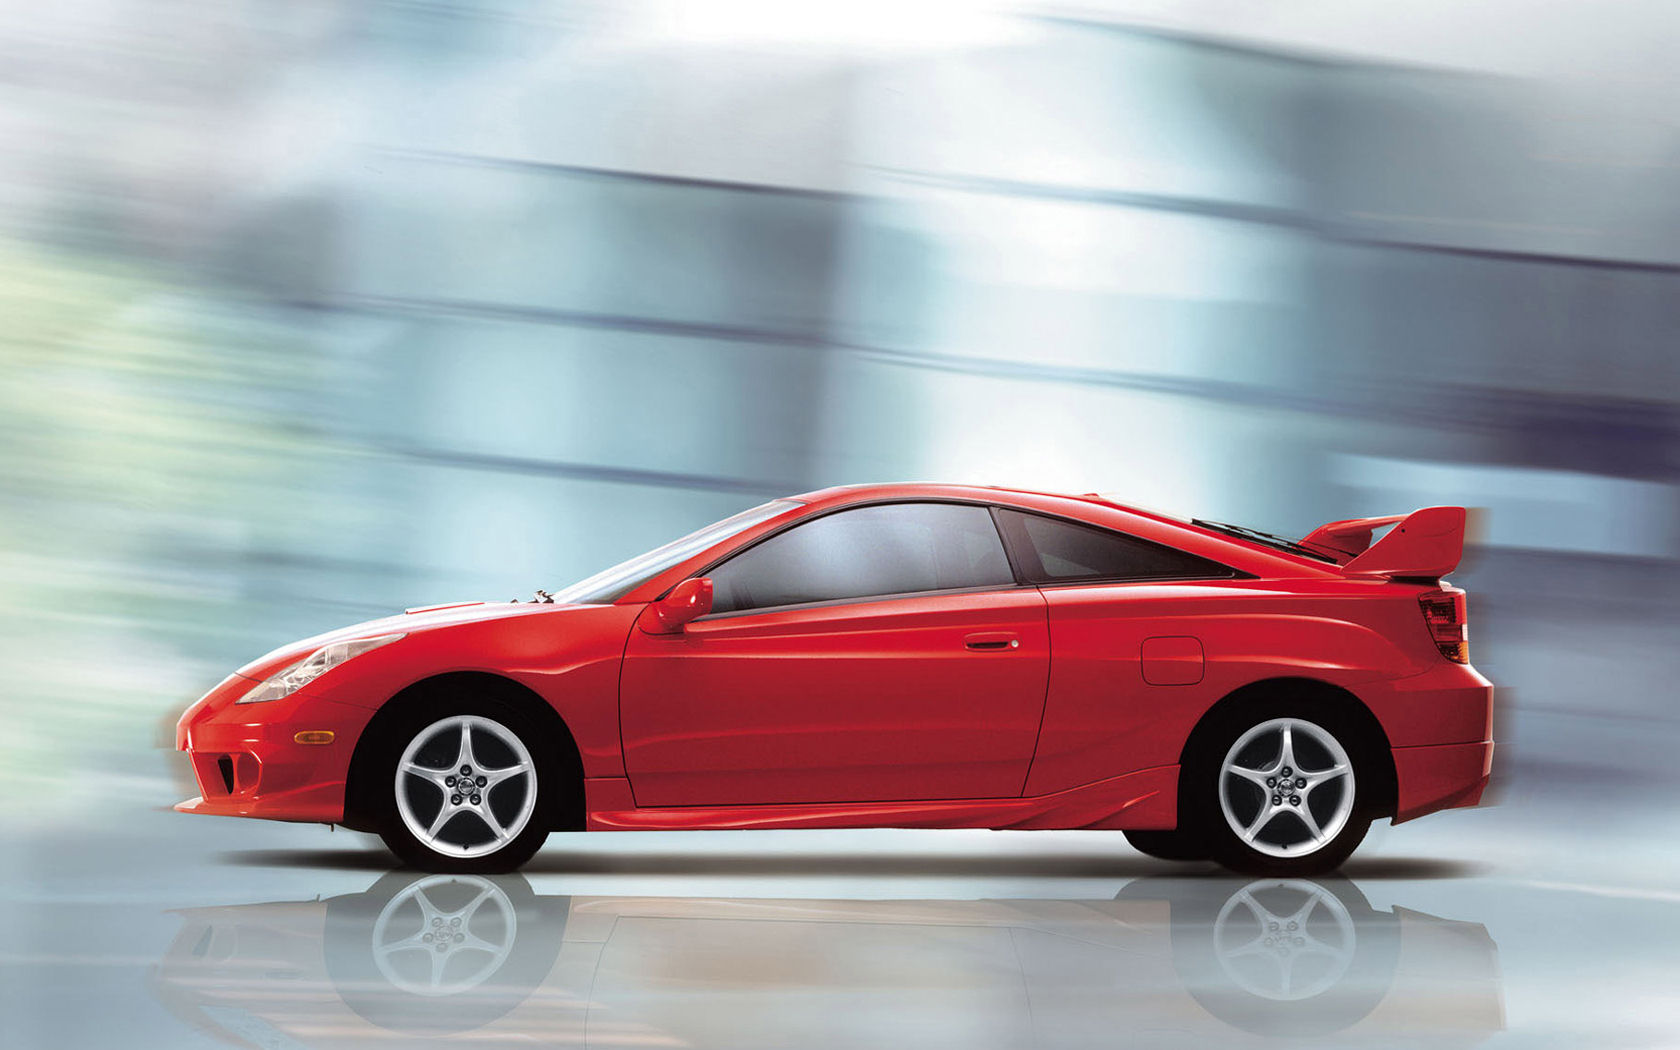 The Toyota Celica: A Sporty Legend That Redefined Performance and Style